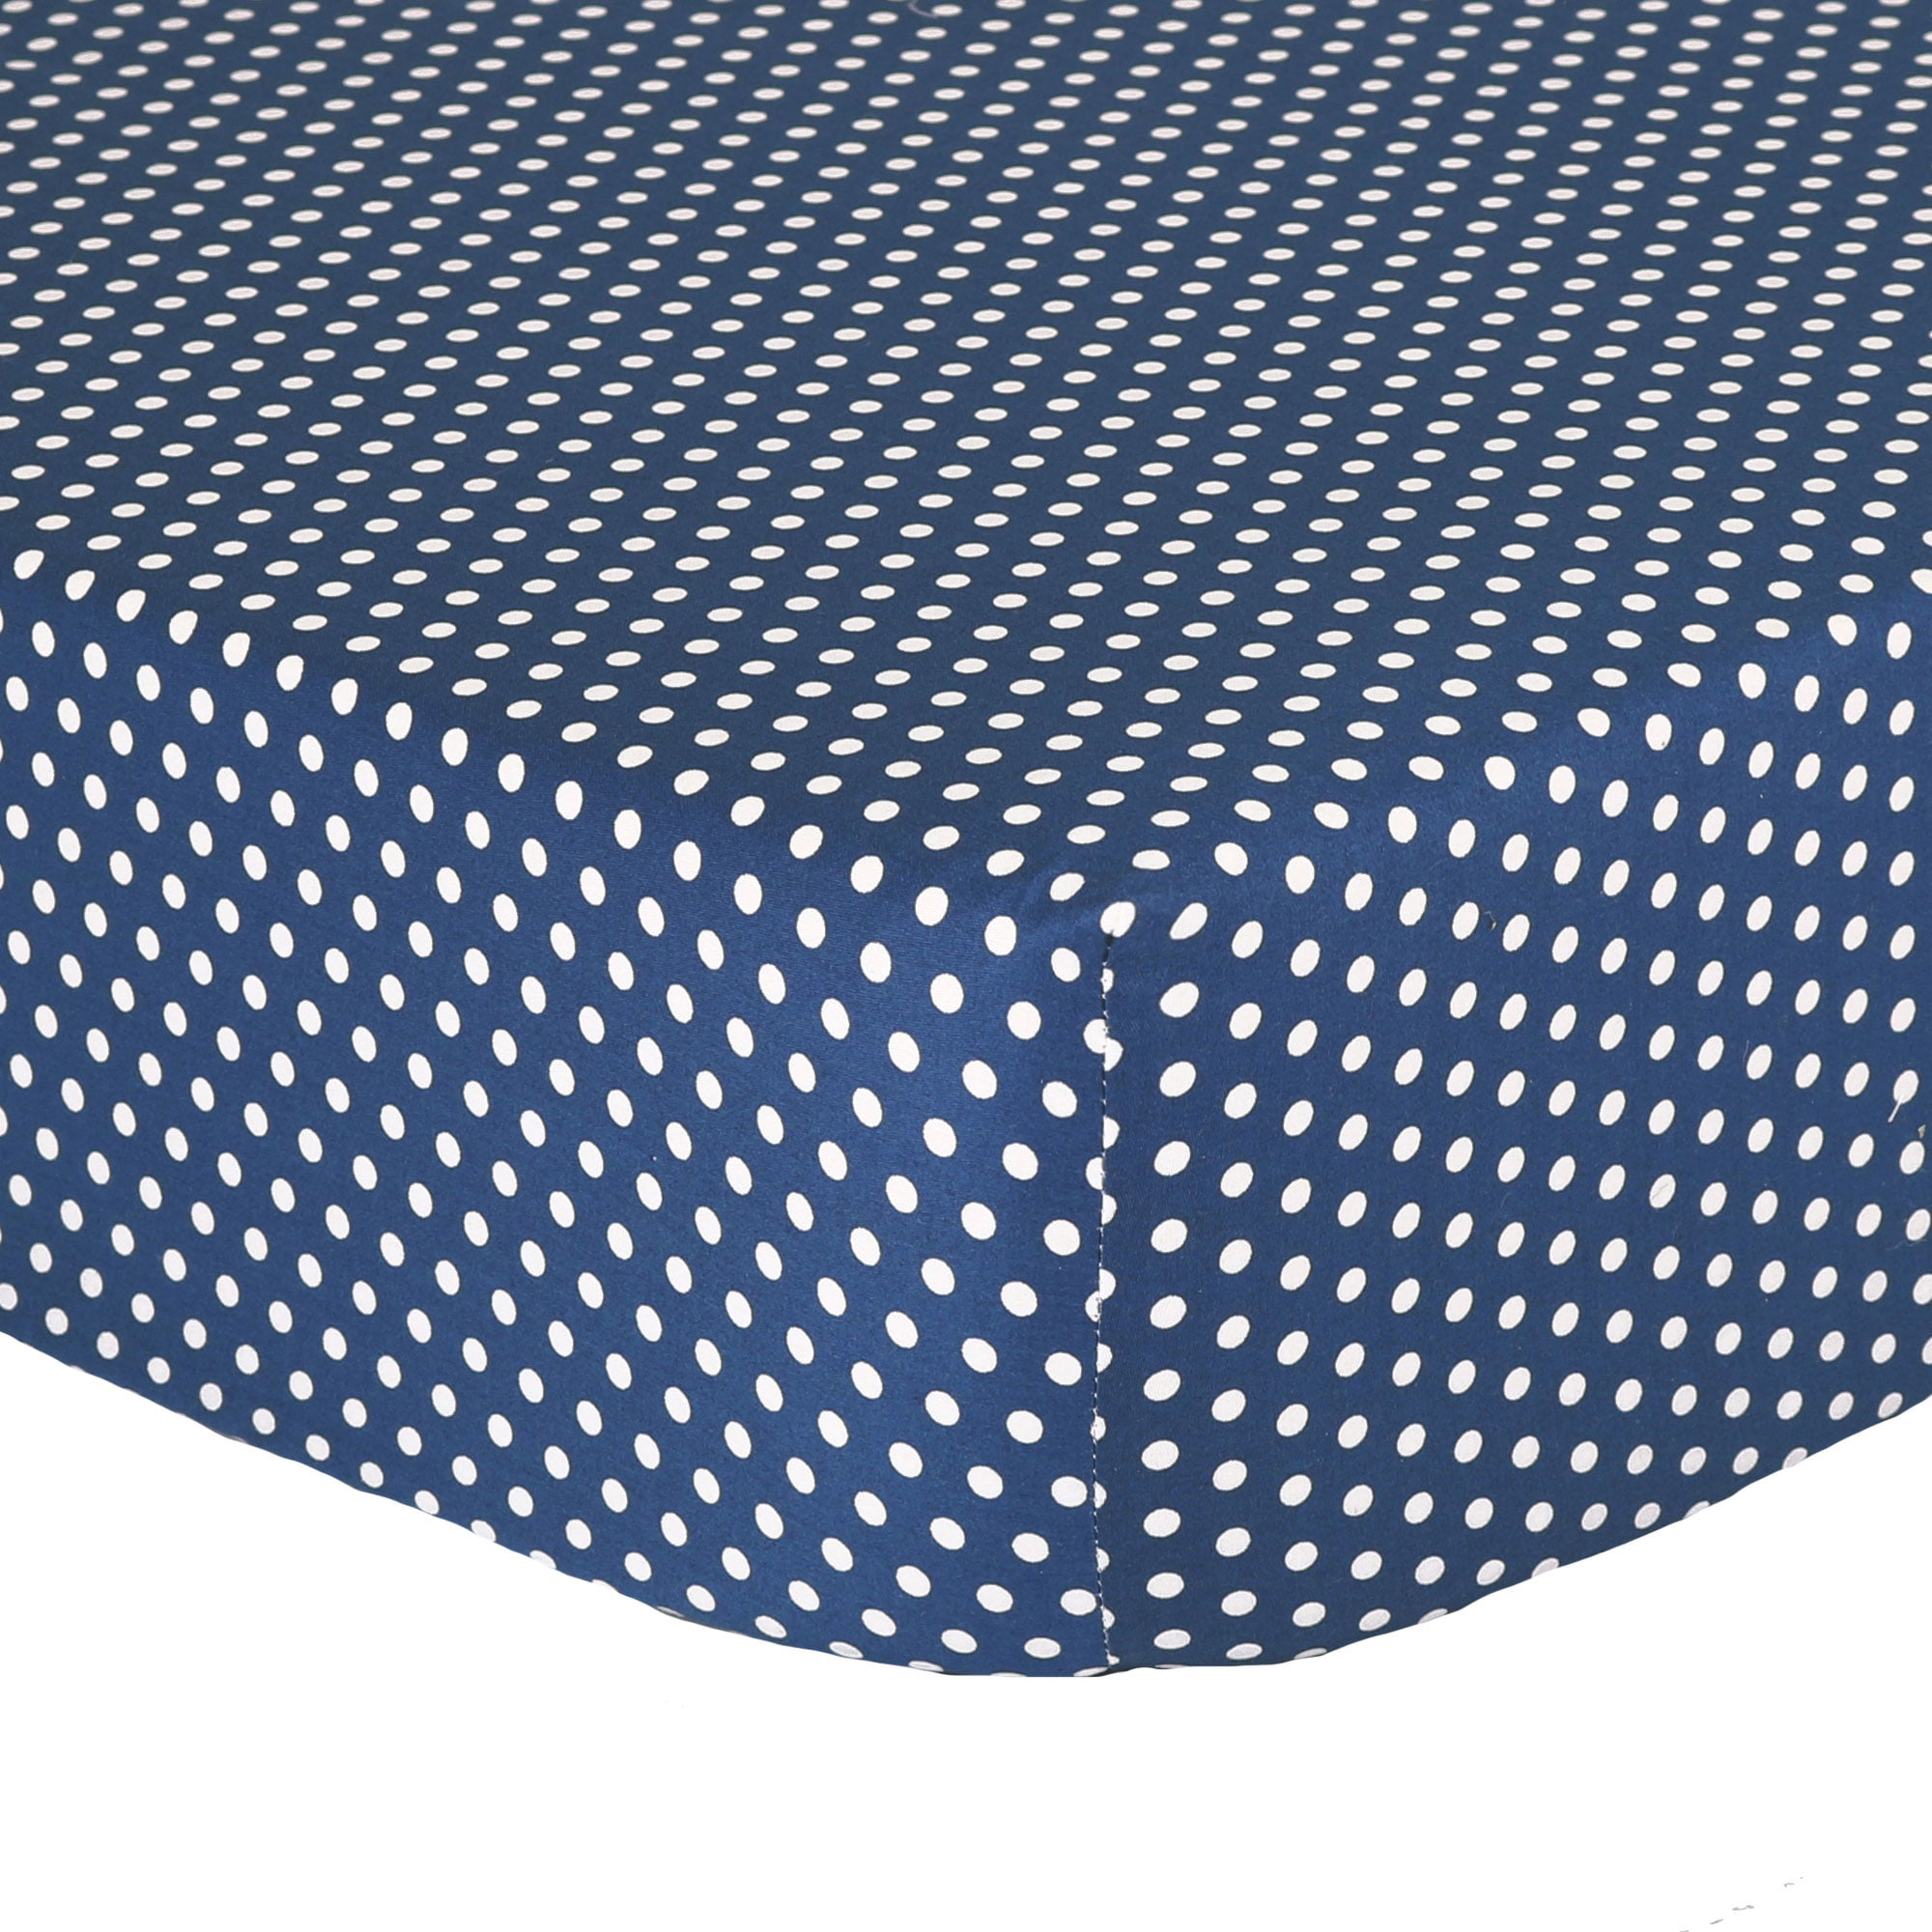 Black Cloud Print on White 100% Cotton Fitted Crib Sheet by The Peanut Shell 